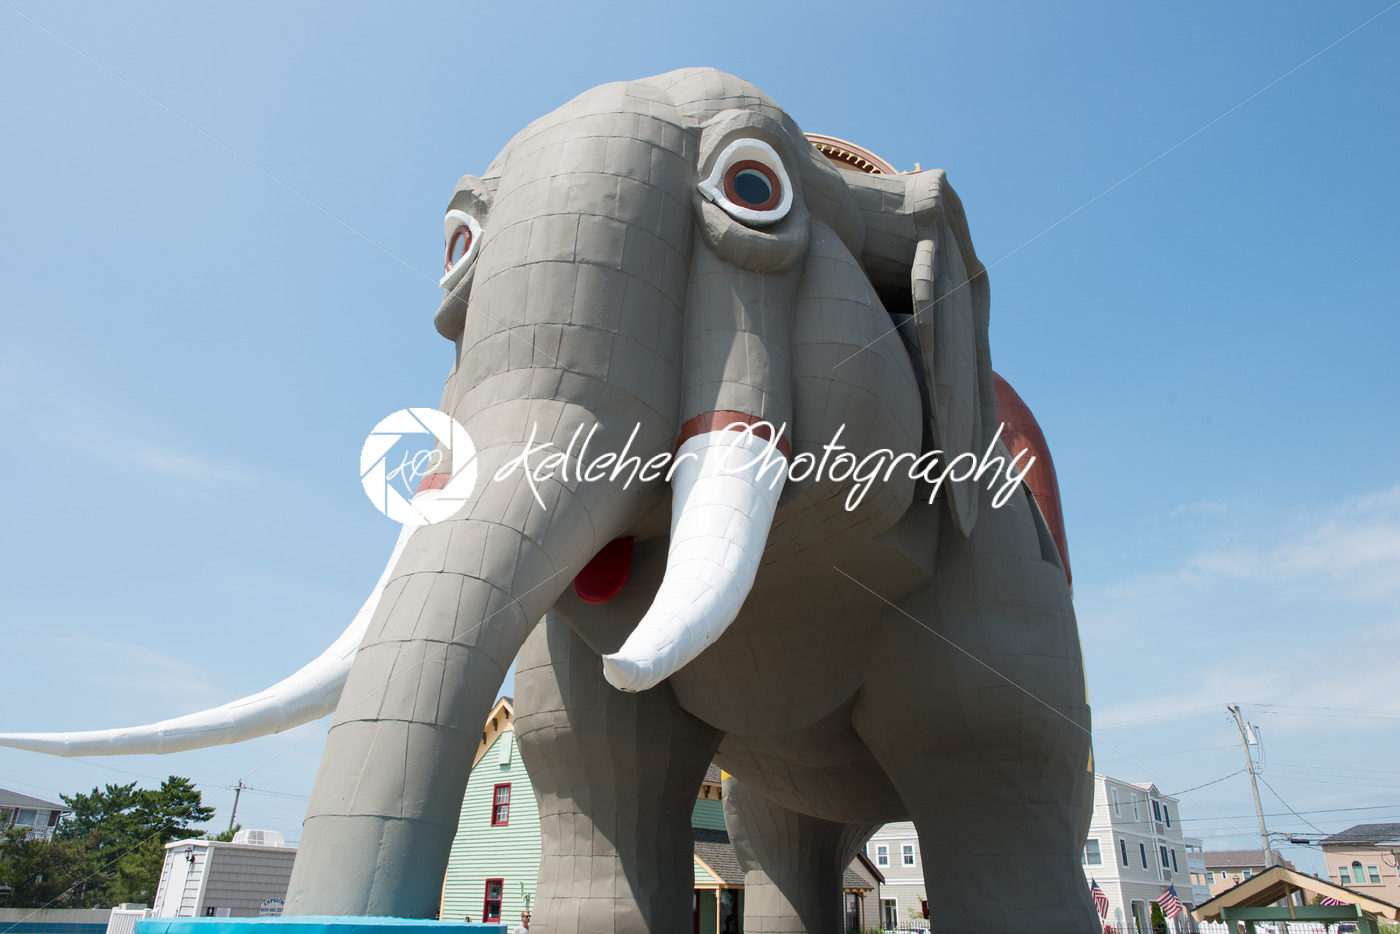 MARGATE, NJ – AUGUST 16: Lucy the Elephant on August 16, 2016 - Kelleher Photography Store